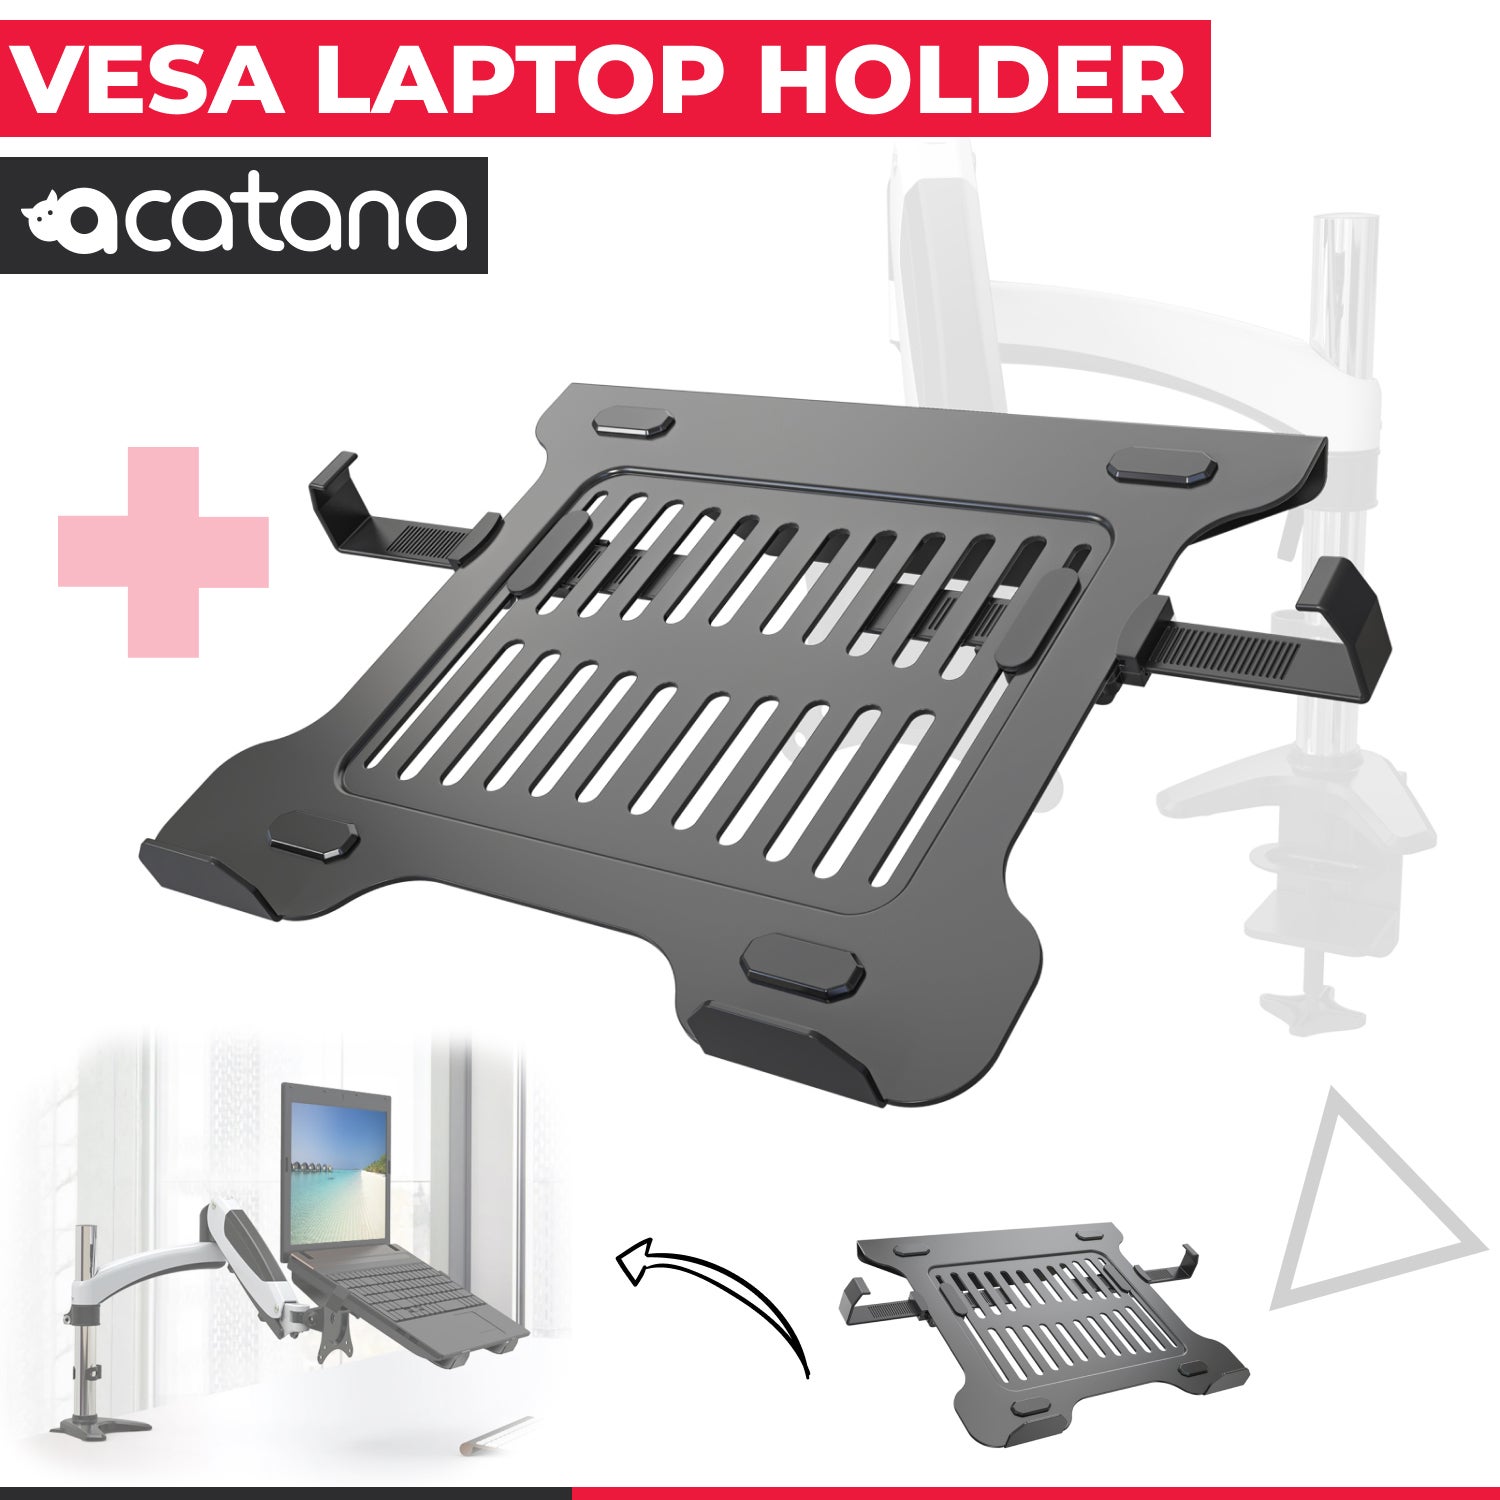 acatana ACA-LH03 - VESA Laptop Holder Mount Adapter Tray for Computer Monitor Stand Arm Desk Mount Notebook Connector fits 10” to 15.6” inches